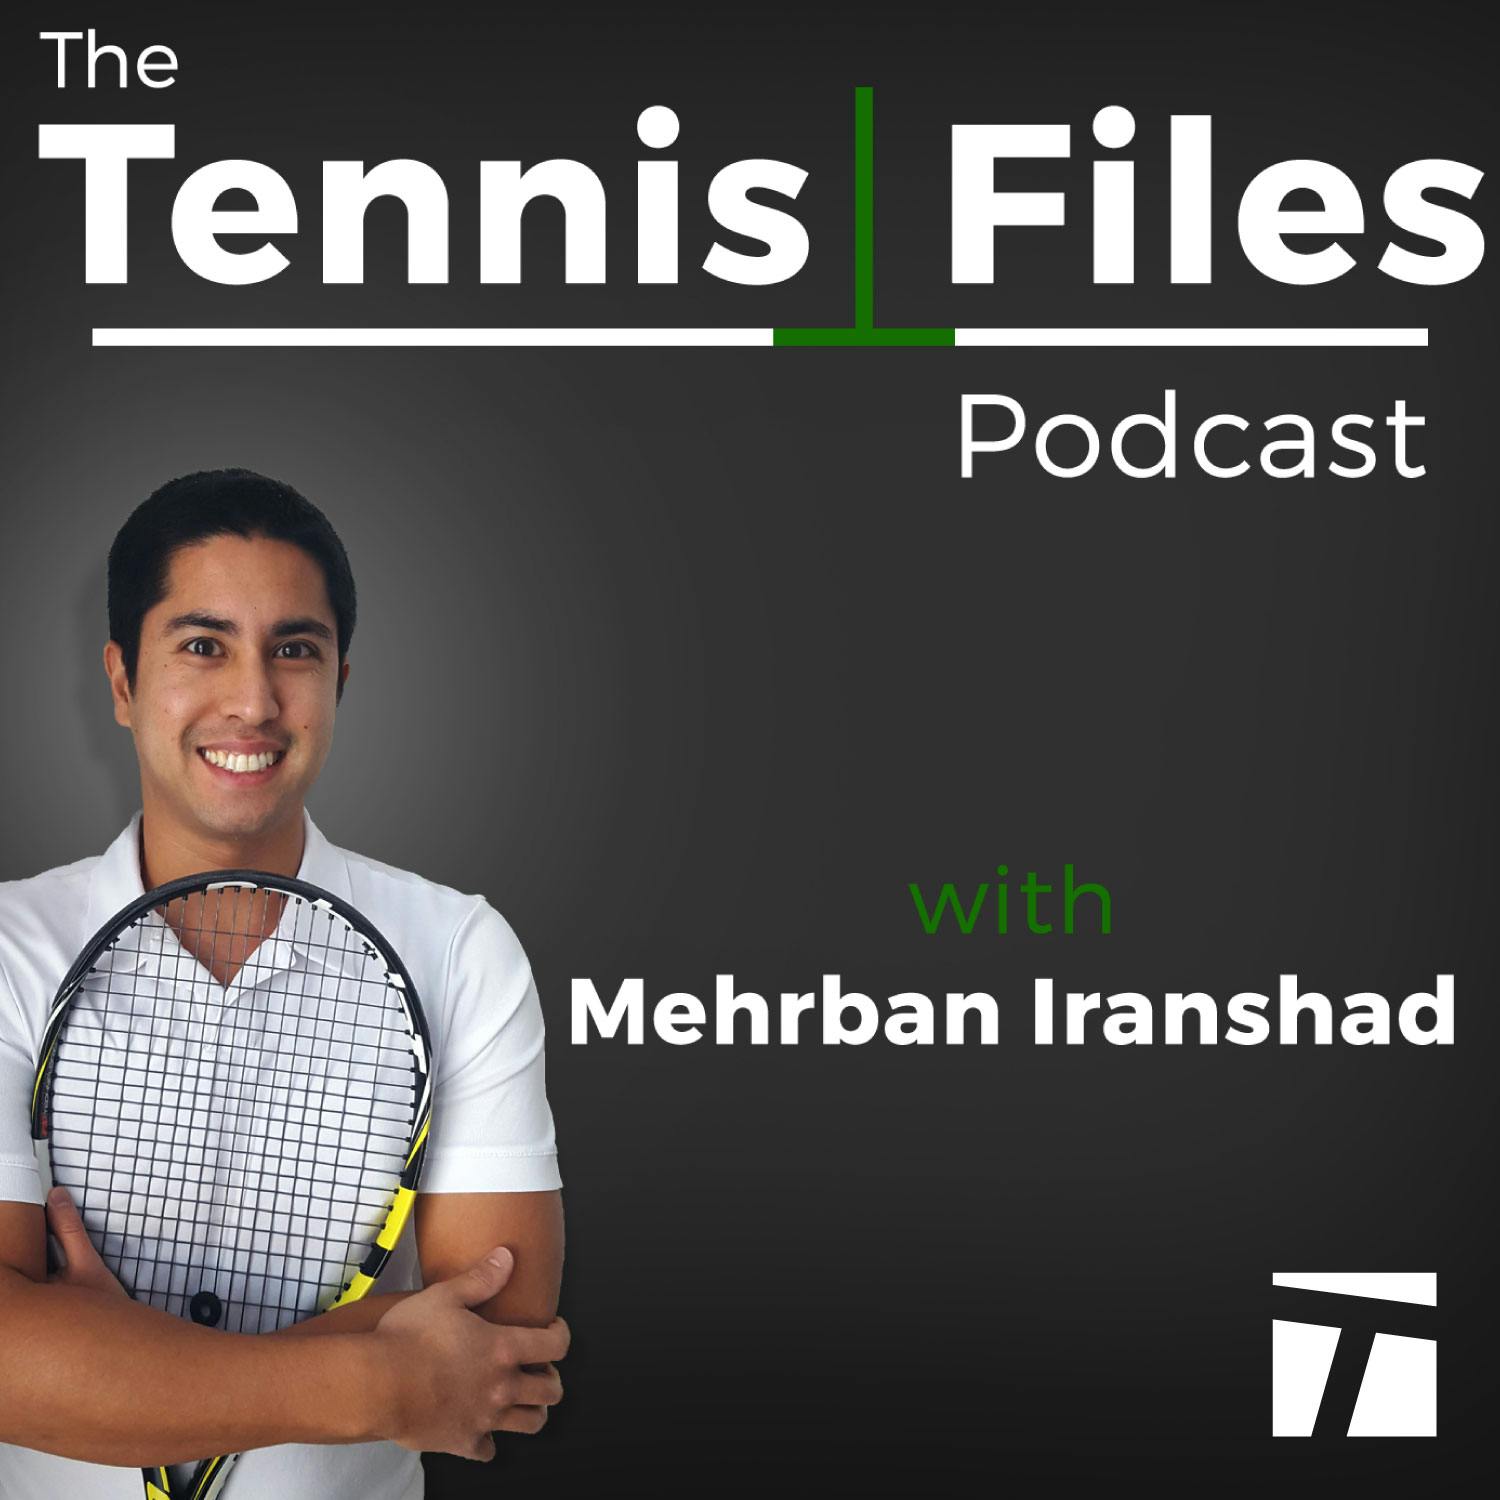 TFP 333: How to Play More Confident & Relaxed Tennis with Nathan de Veer